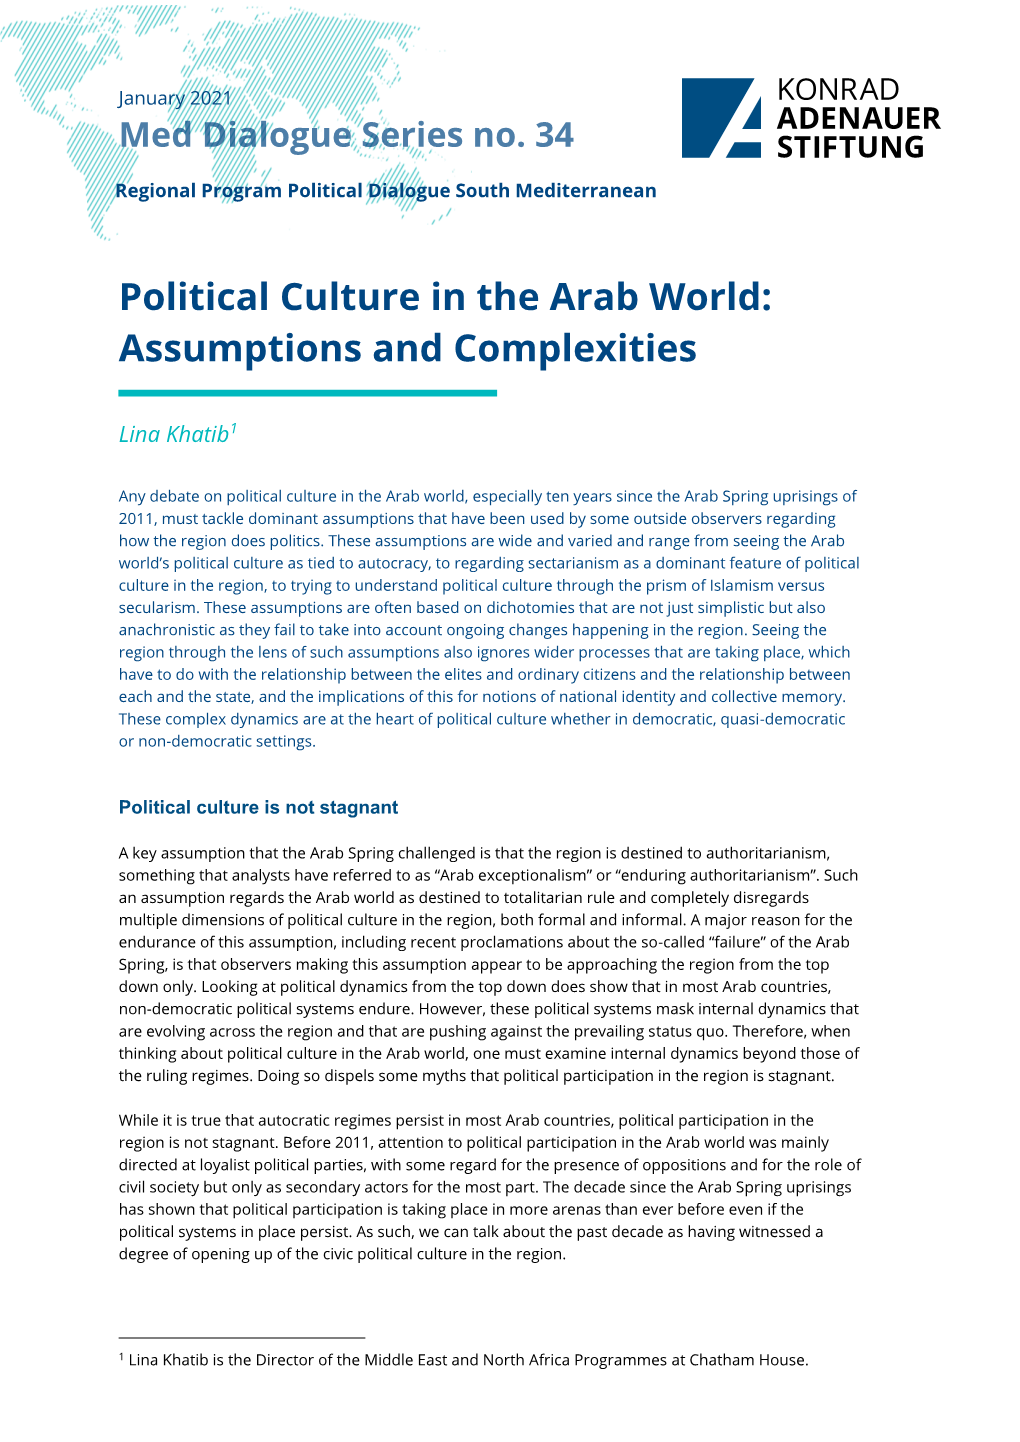 Political Culture in the Arab World: Assumptions and Complexities